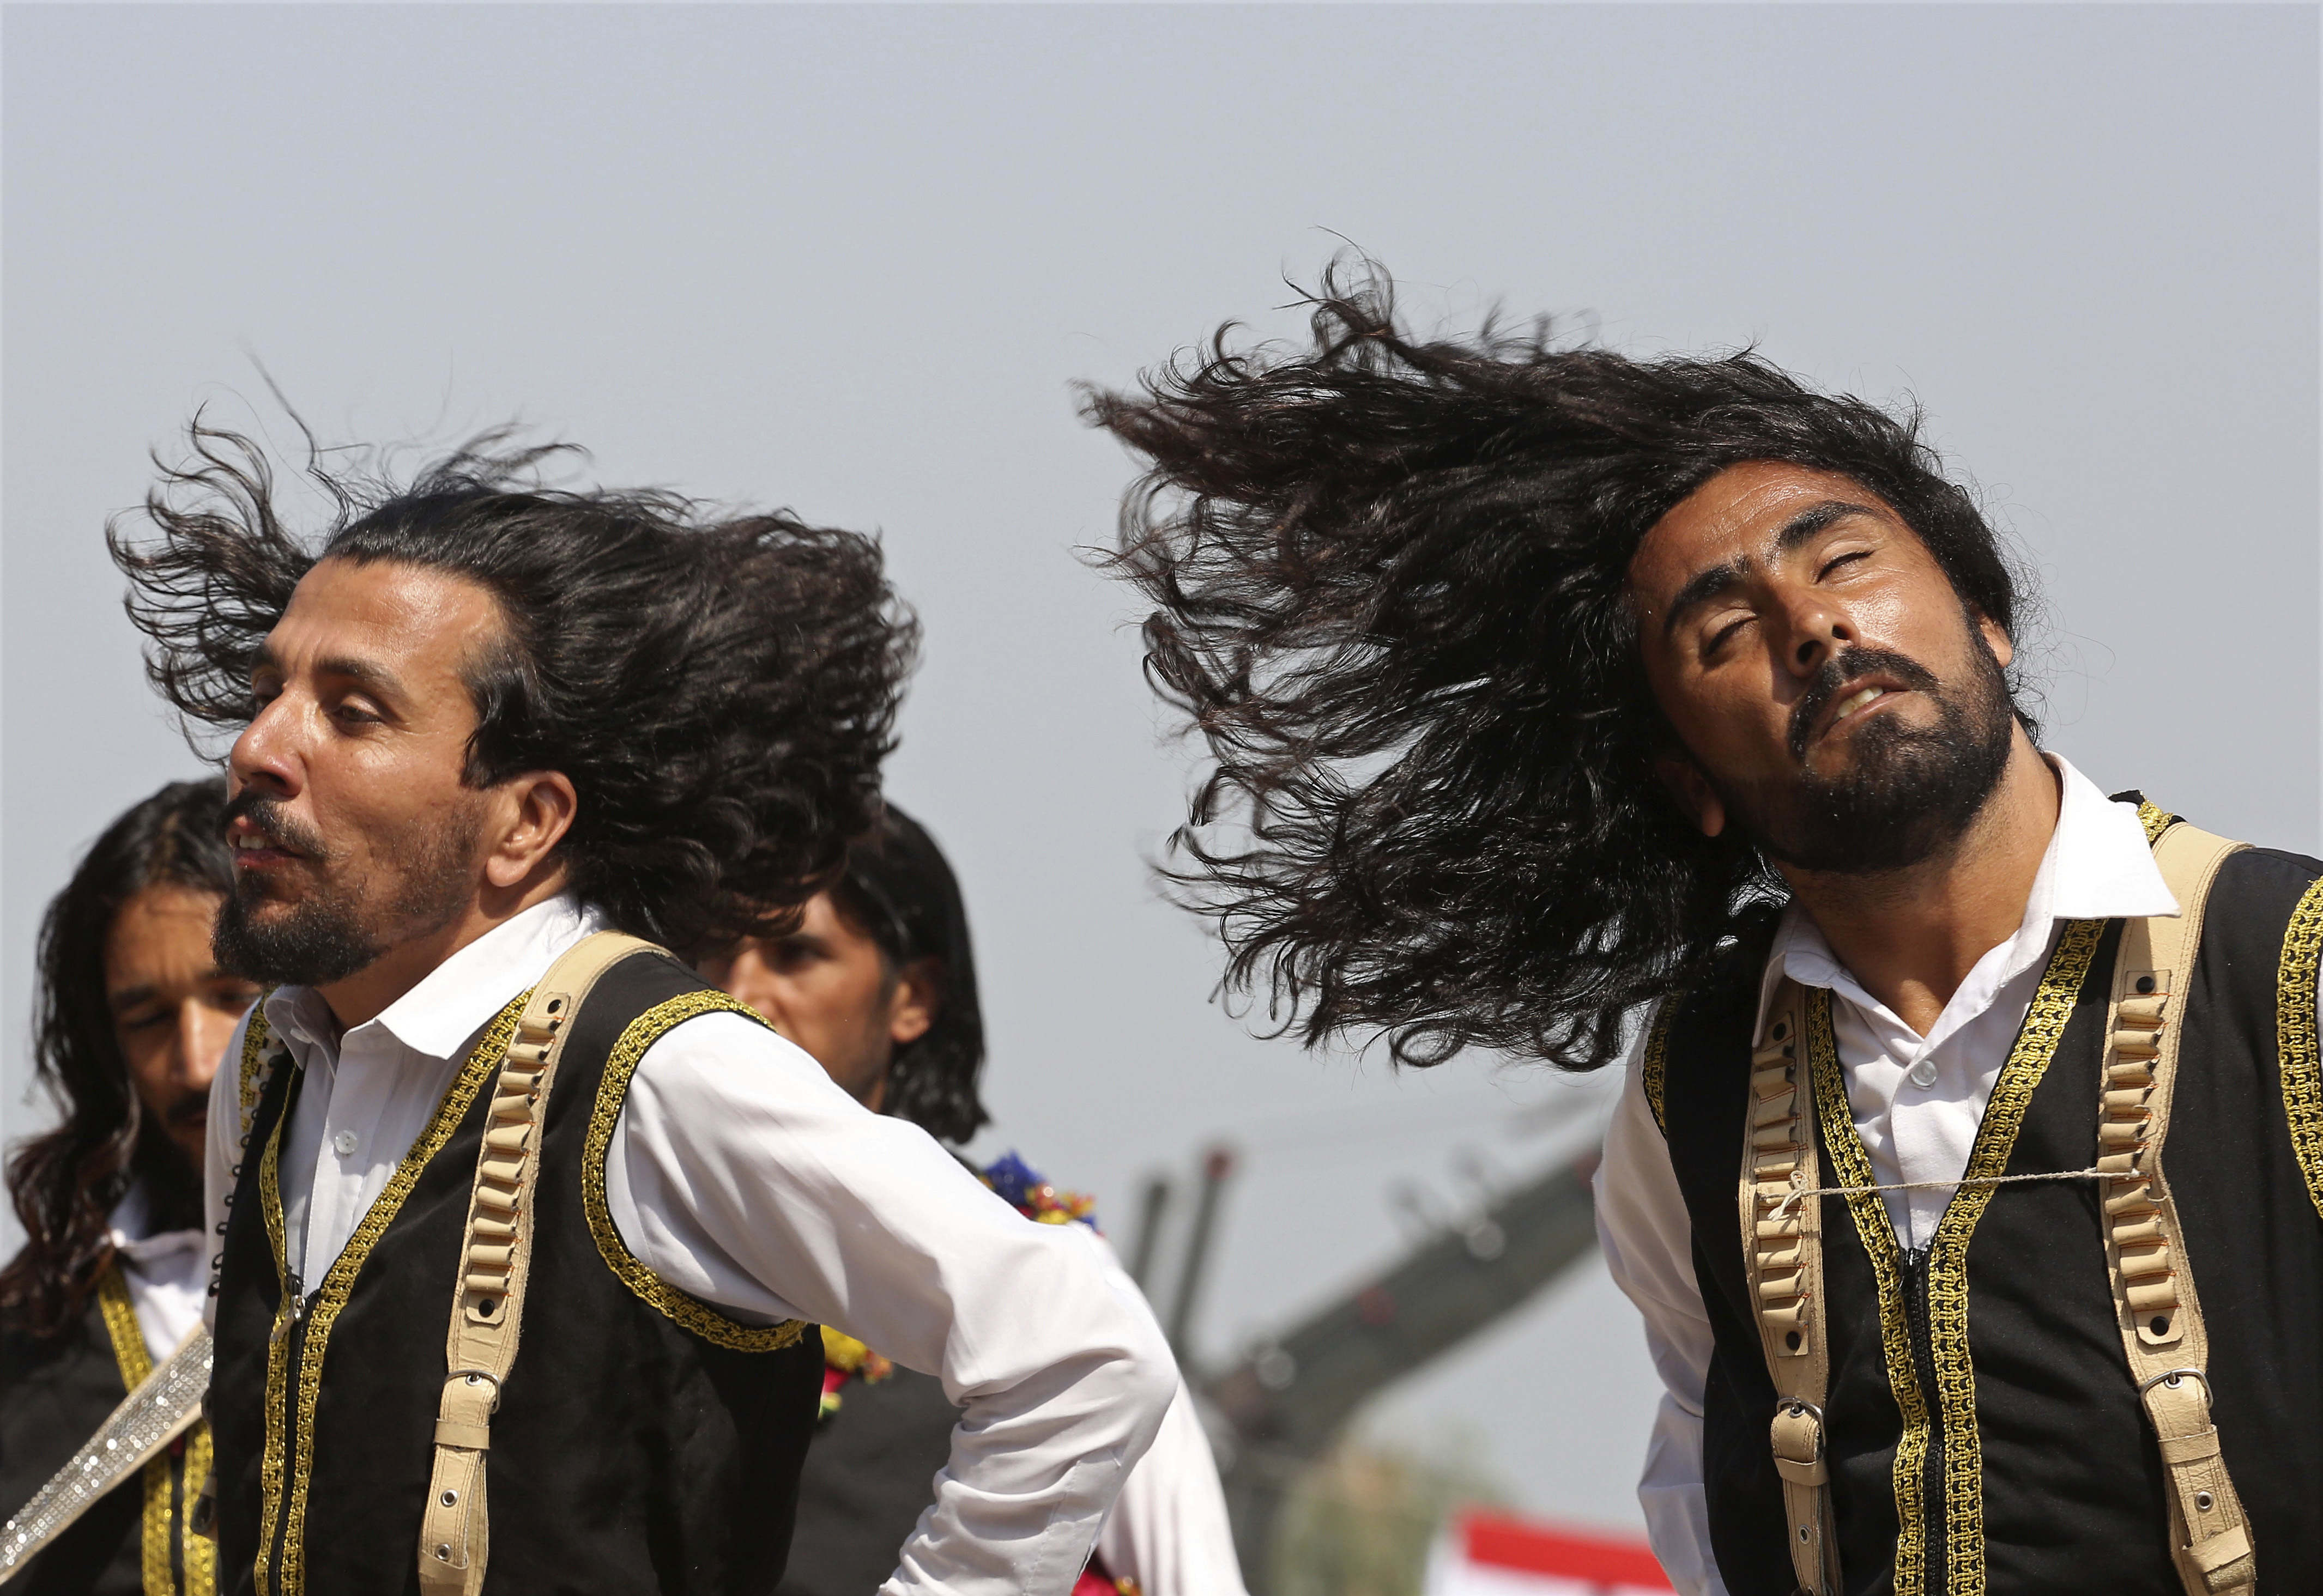 Traditional dancers perform during a ceremony to celebrate Pakistan Defense Day, marking the 1965 war with India over the disputed Kashmir region, in Peshawar, Pakistan, Wednesday, Sept. 6, 2017. (AP Photo/Muhammad Sajjad)